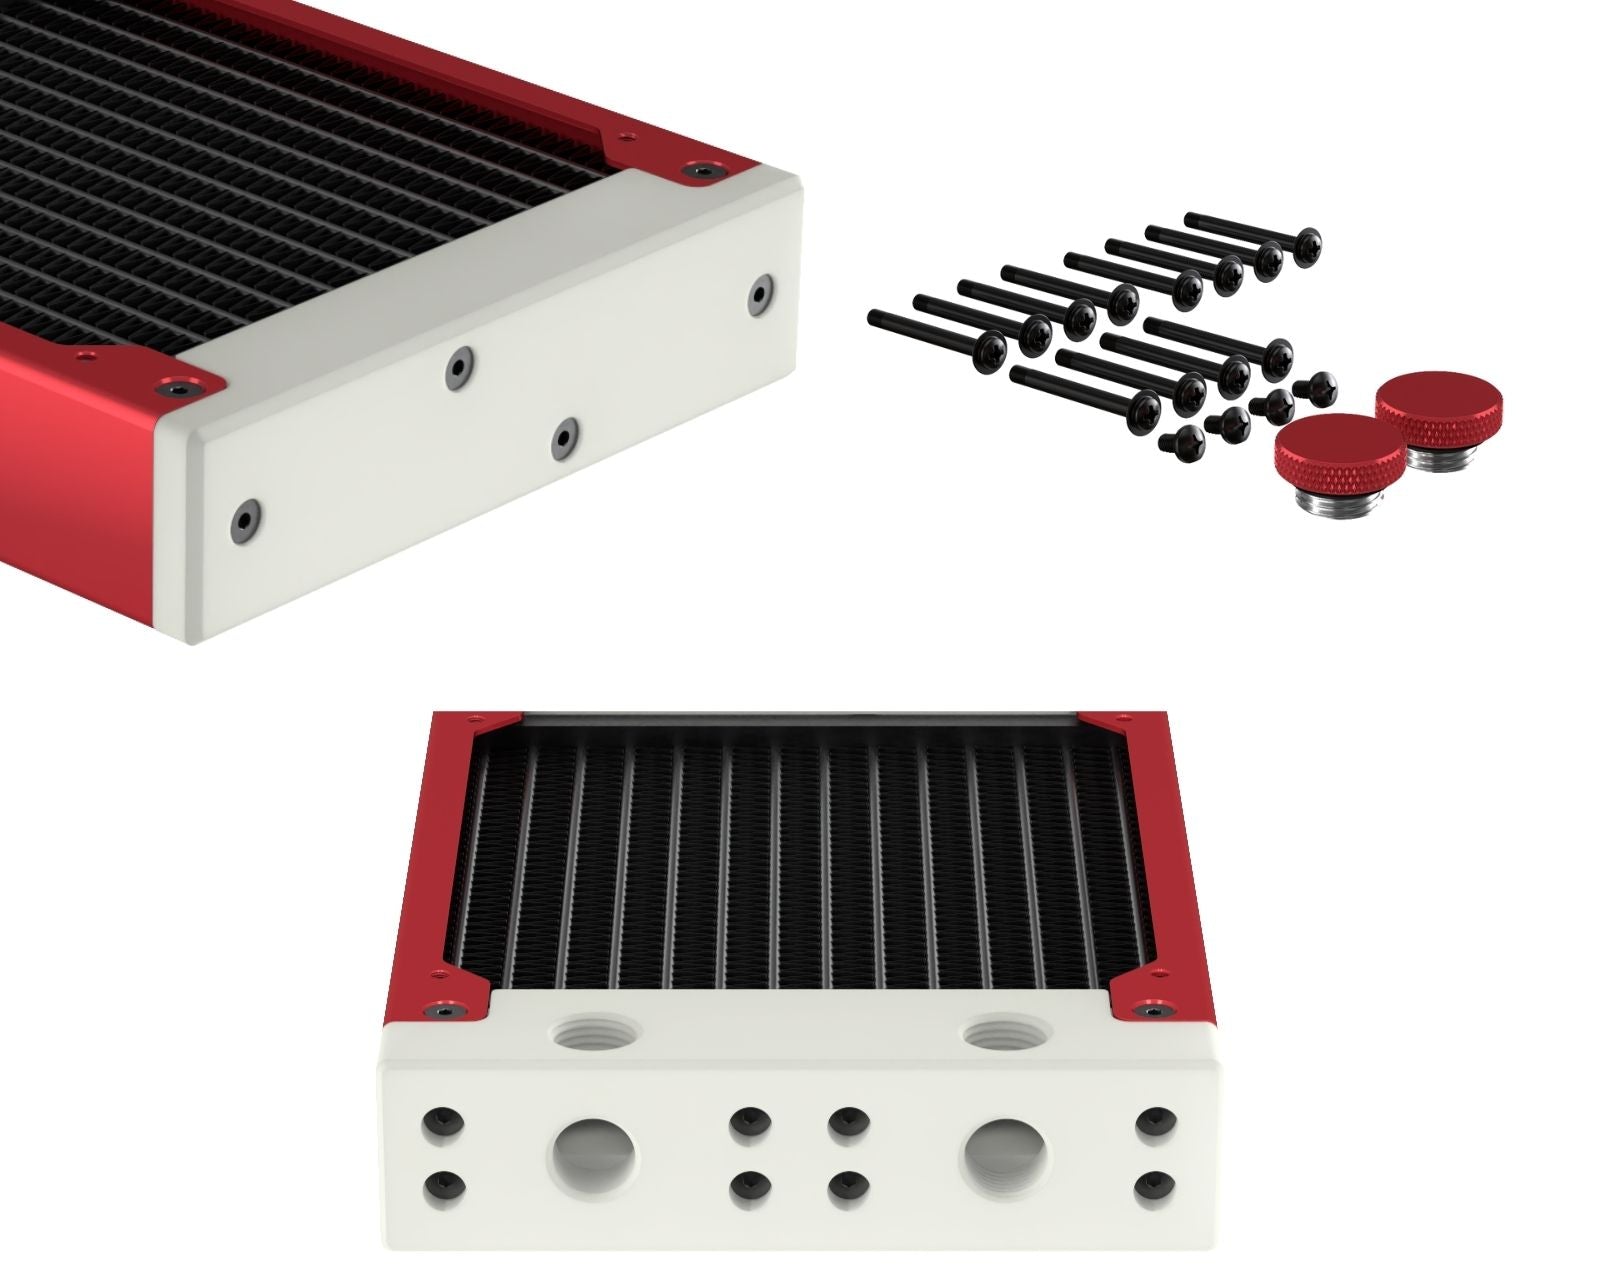 PrimoChill 360SL (30mm) EXIMO Modular Radiator, White POM, 3x120mm, Triple Fan (R-SL-W36) Available in 20+ Colors, Assembled in USA and Custom Watercooling Loop Ready - Candy Red